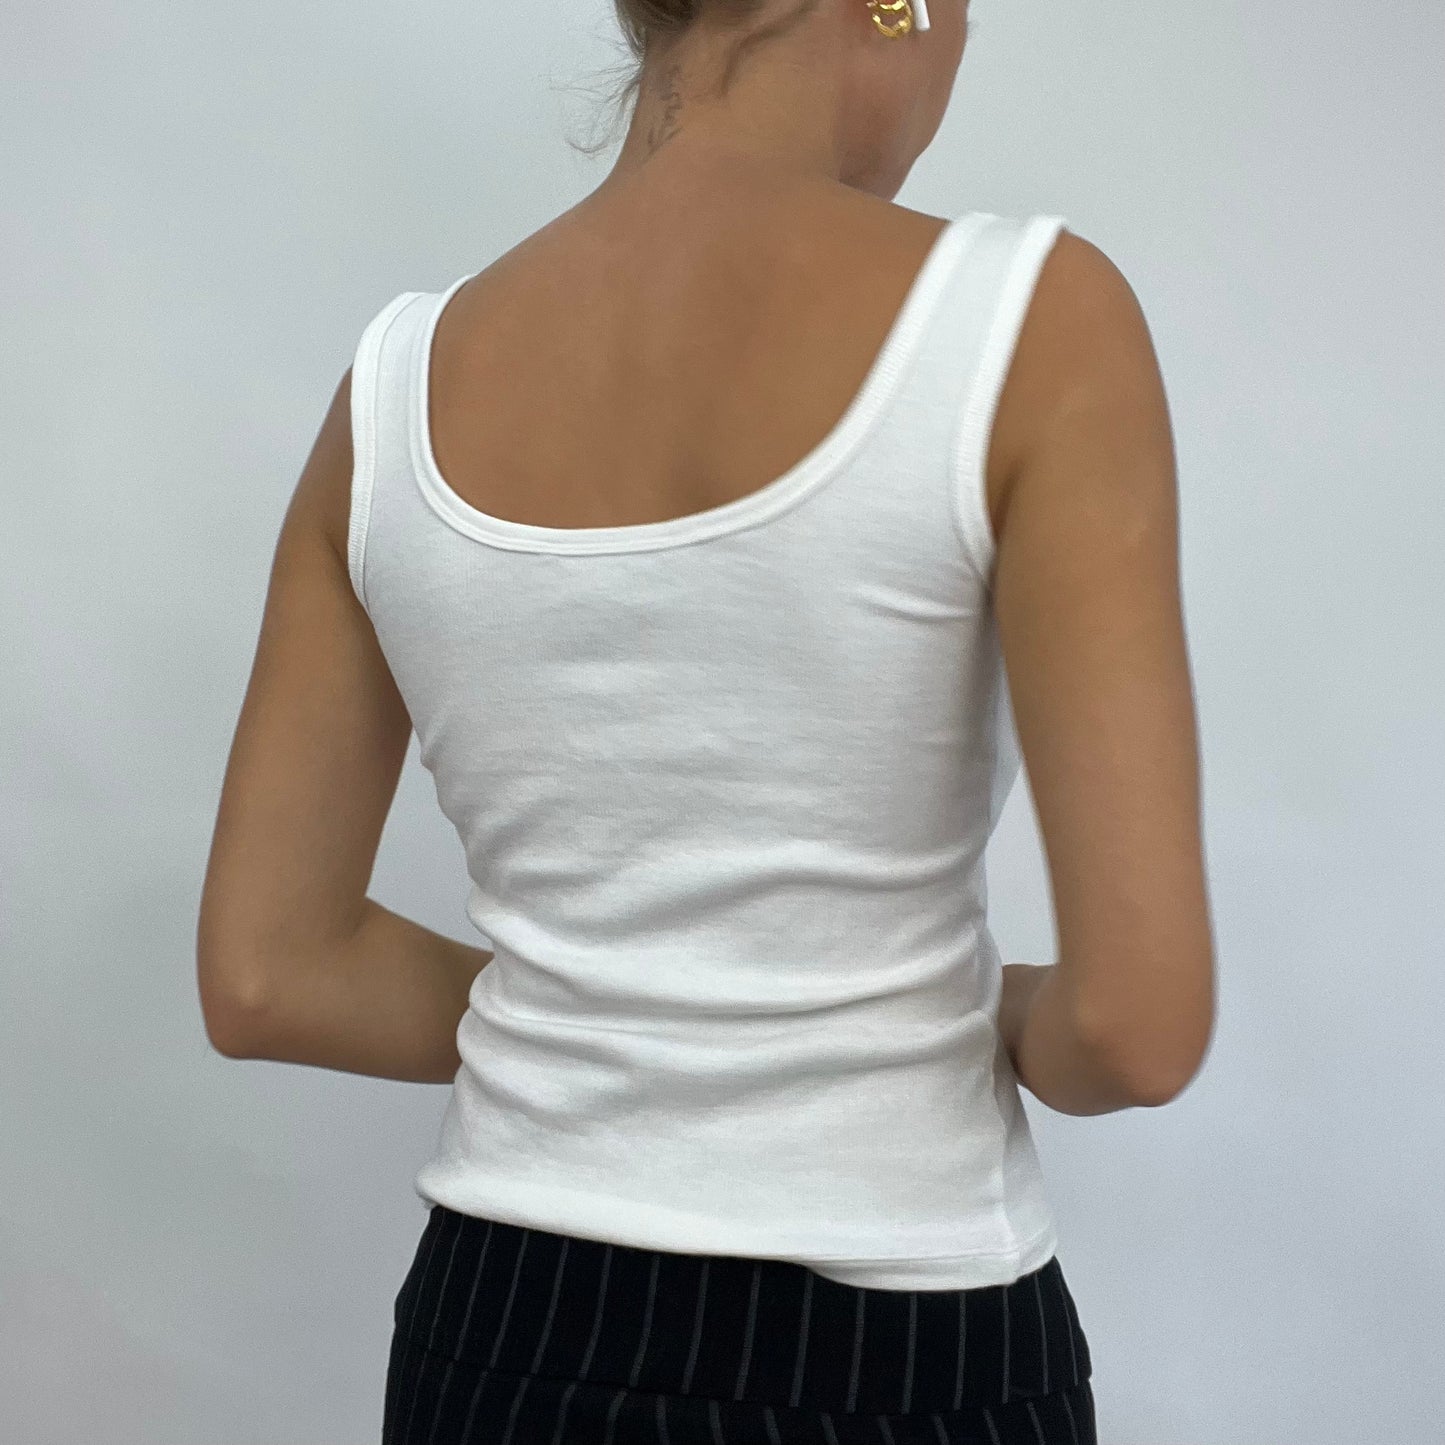 CARRIE BRADSHAW DROP | xsmall white ribbed cami with three buttons on front